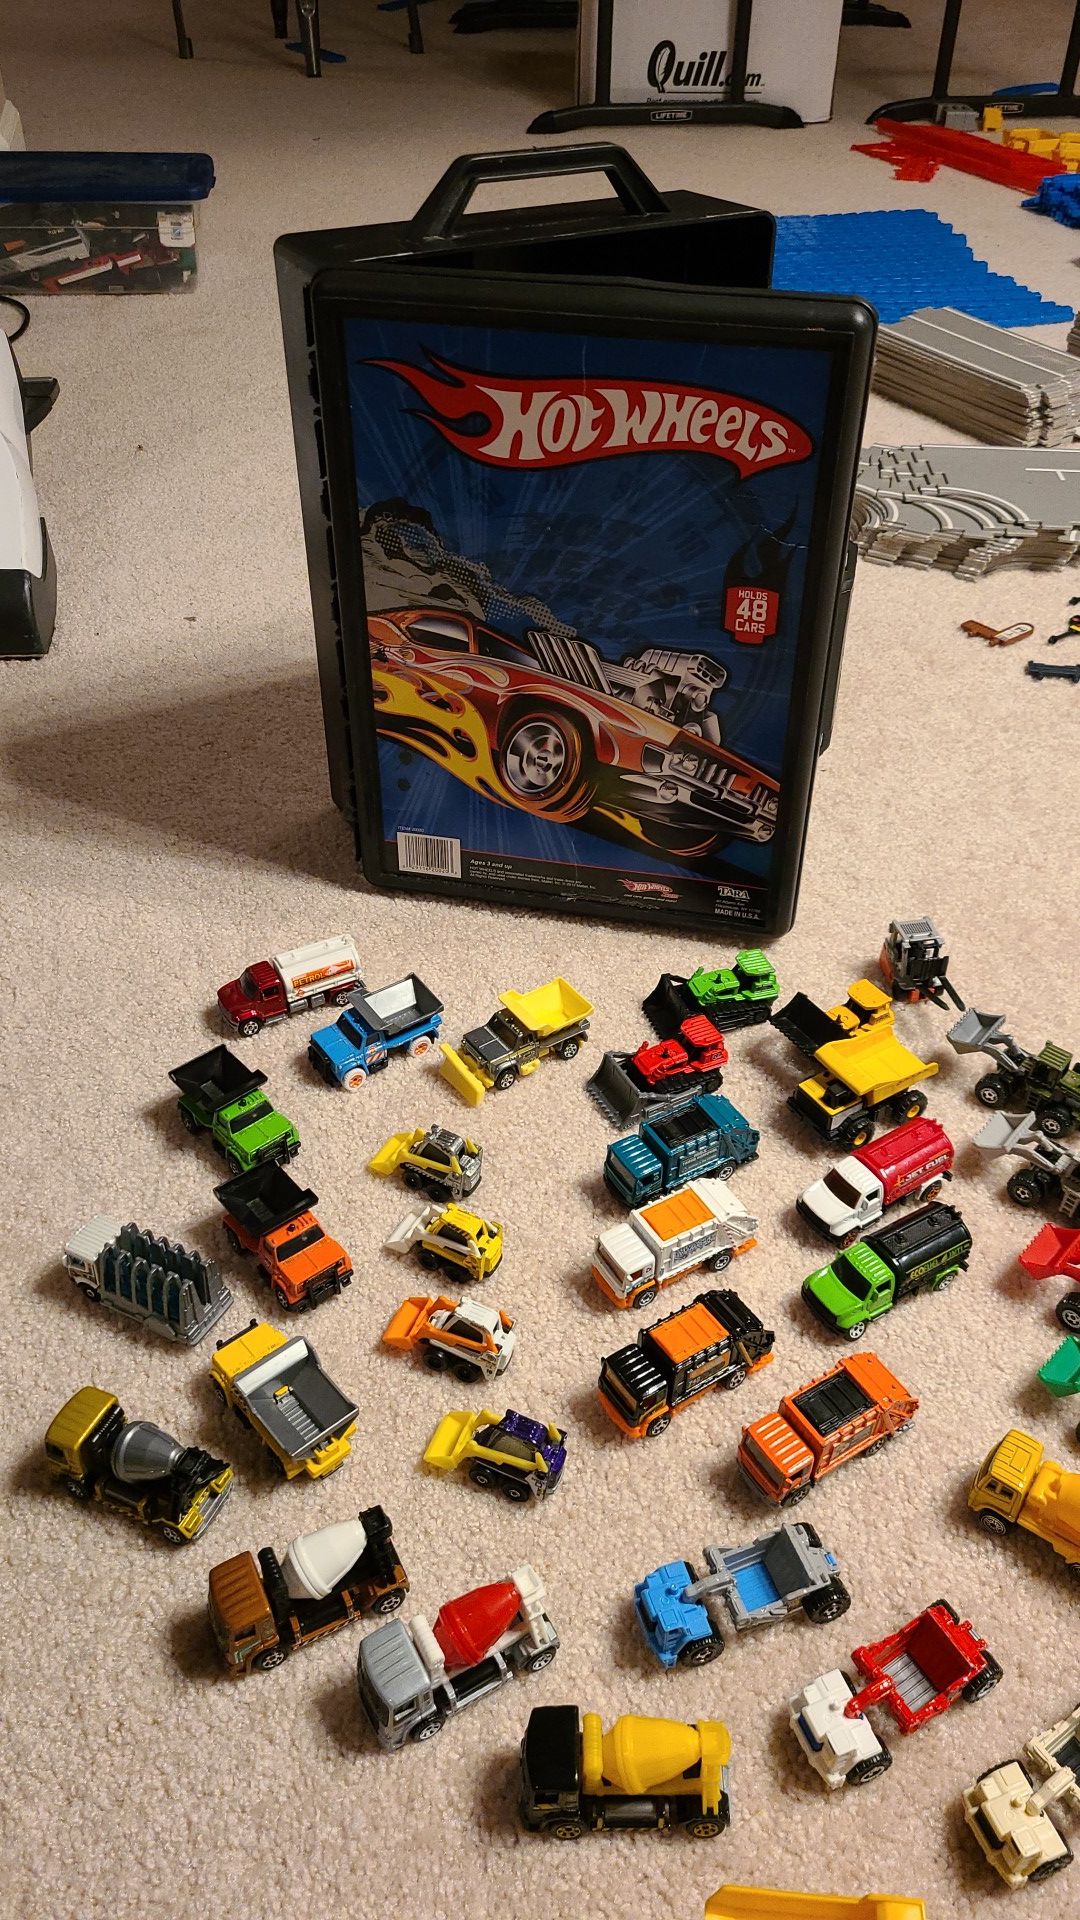 Hot Wheels case with 43 construction toy vehicles